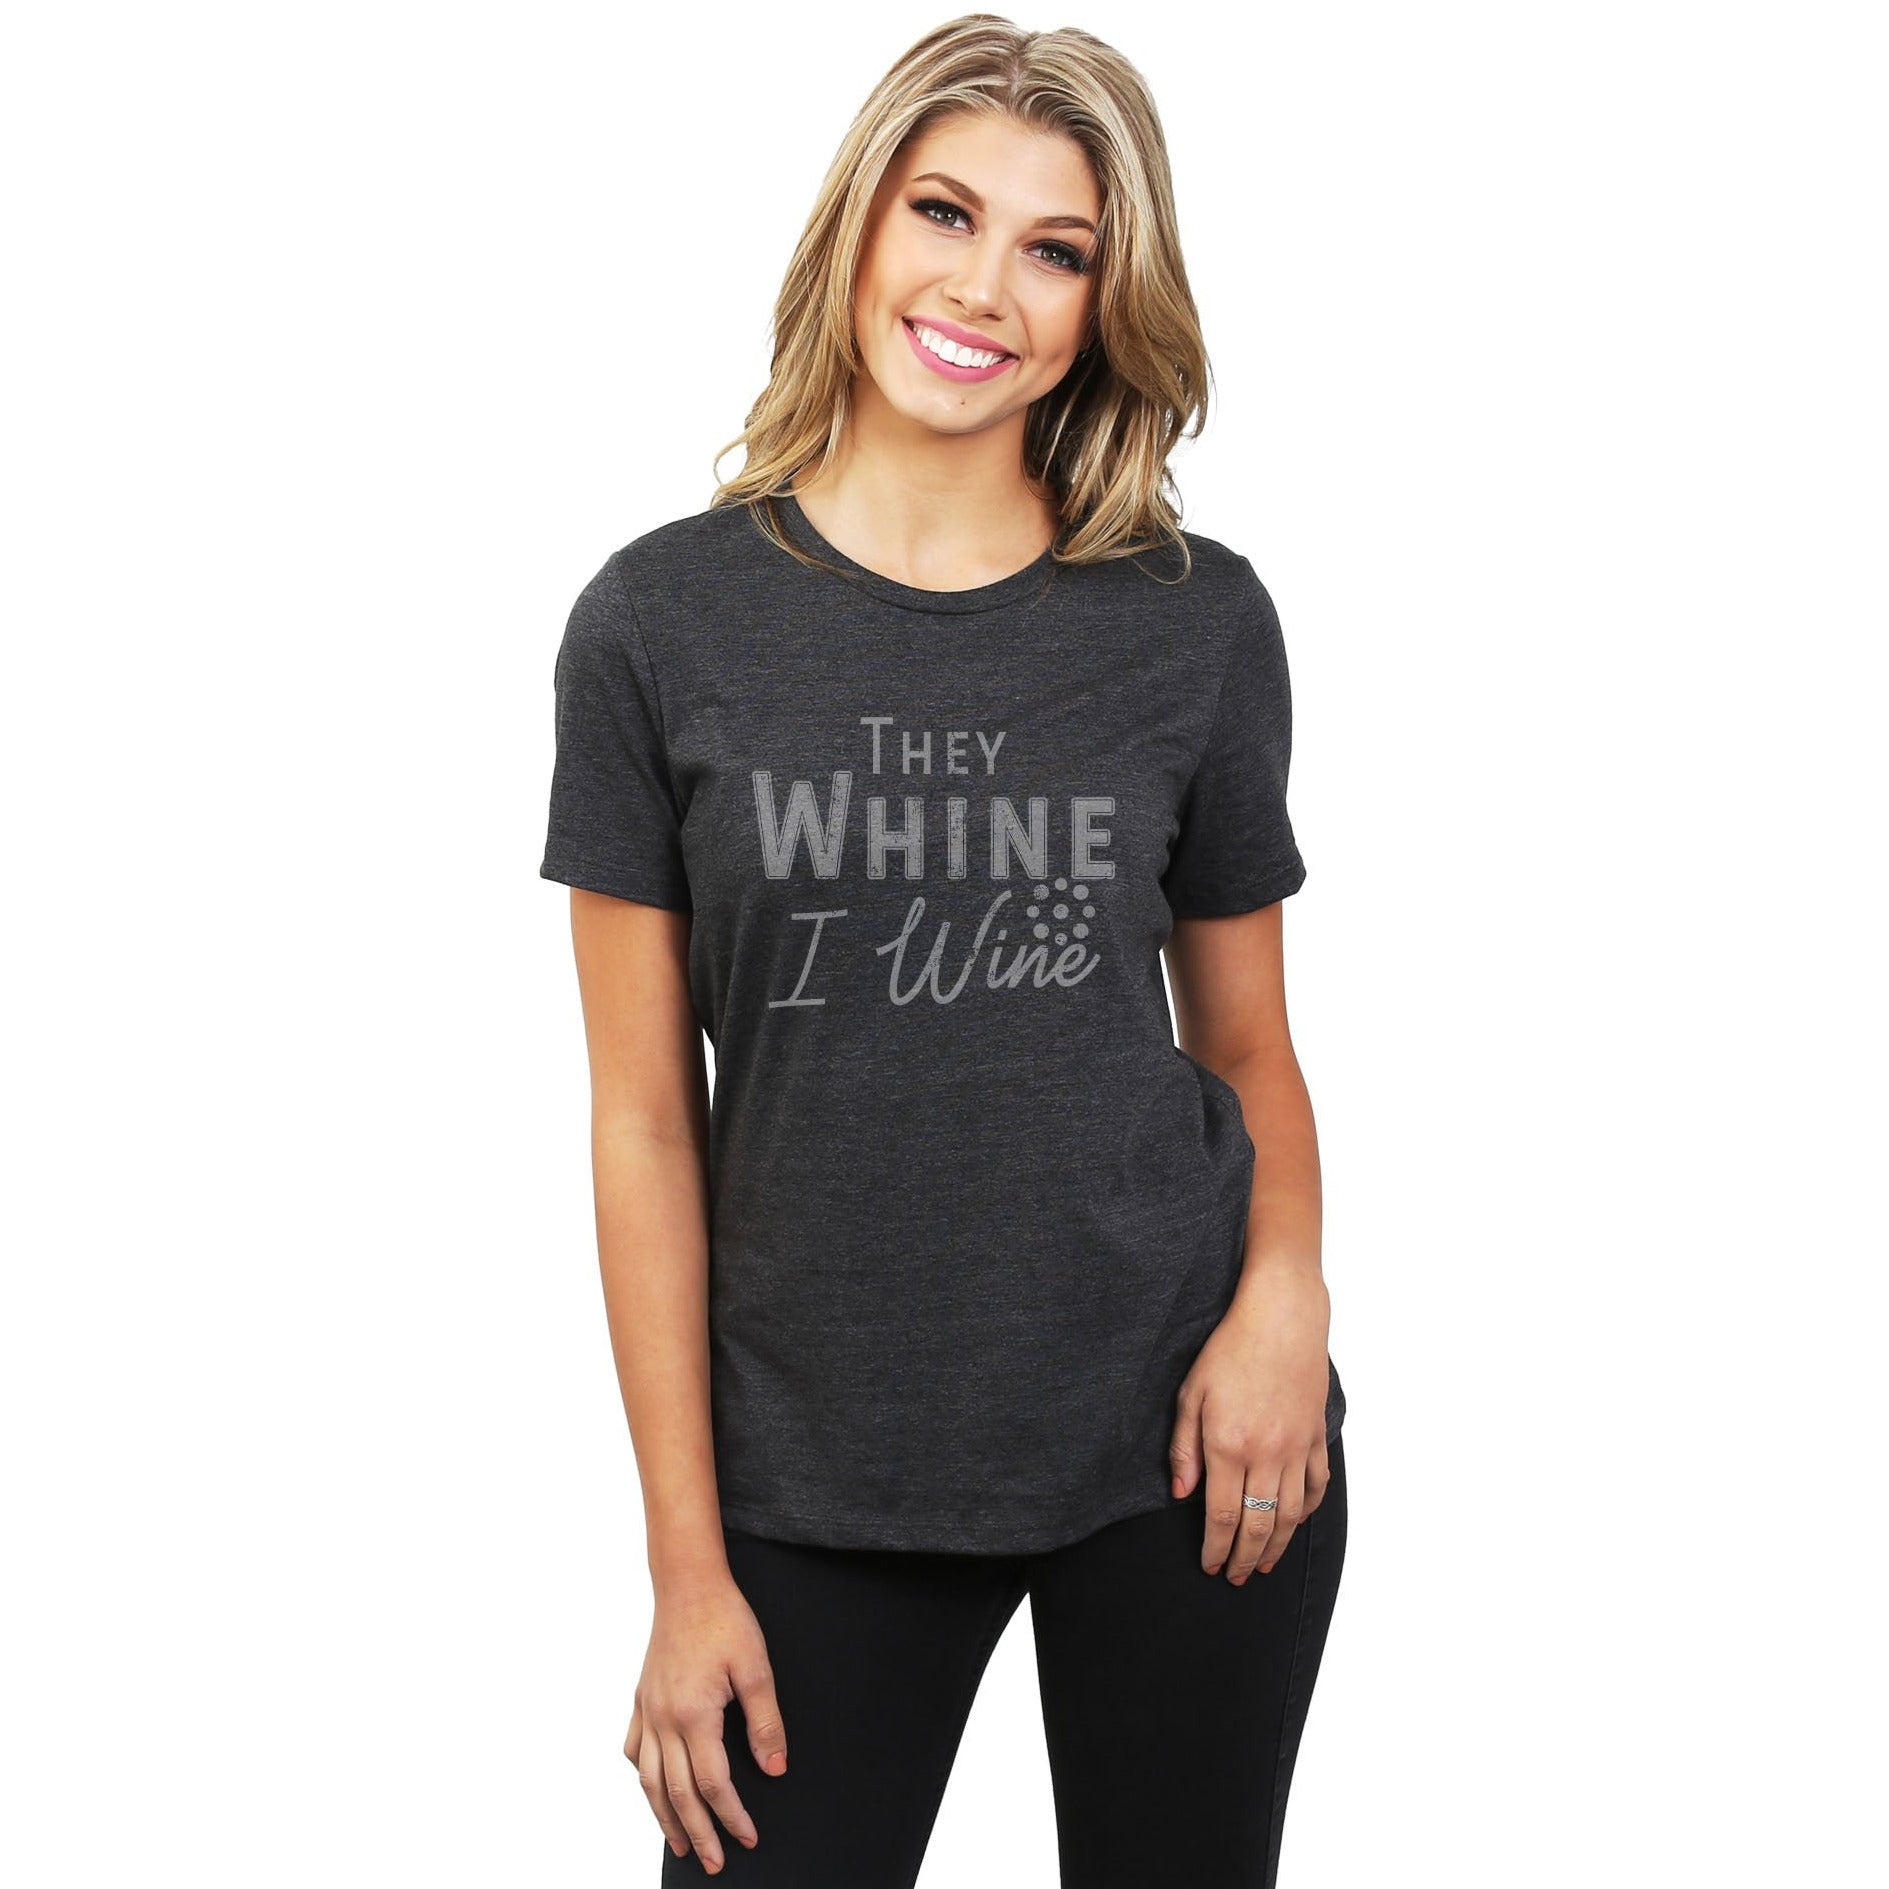 They Whine T-Shirt Crewneck Tee Graphic Top Relaxed Wine Women\'s I